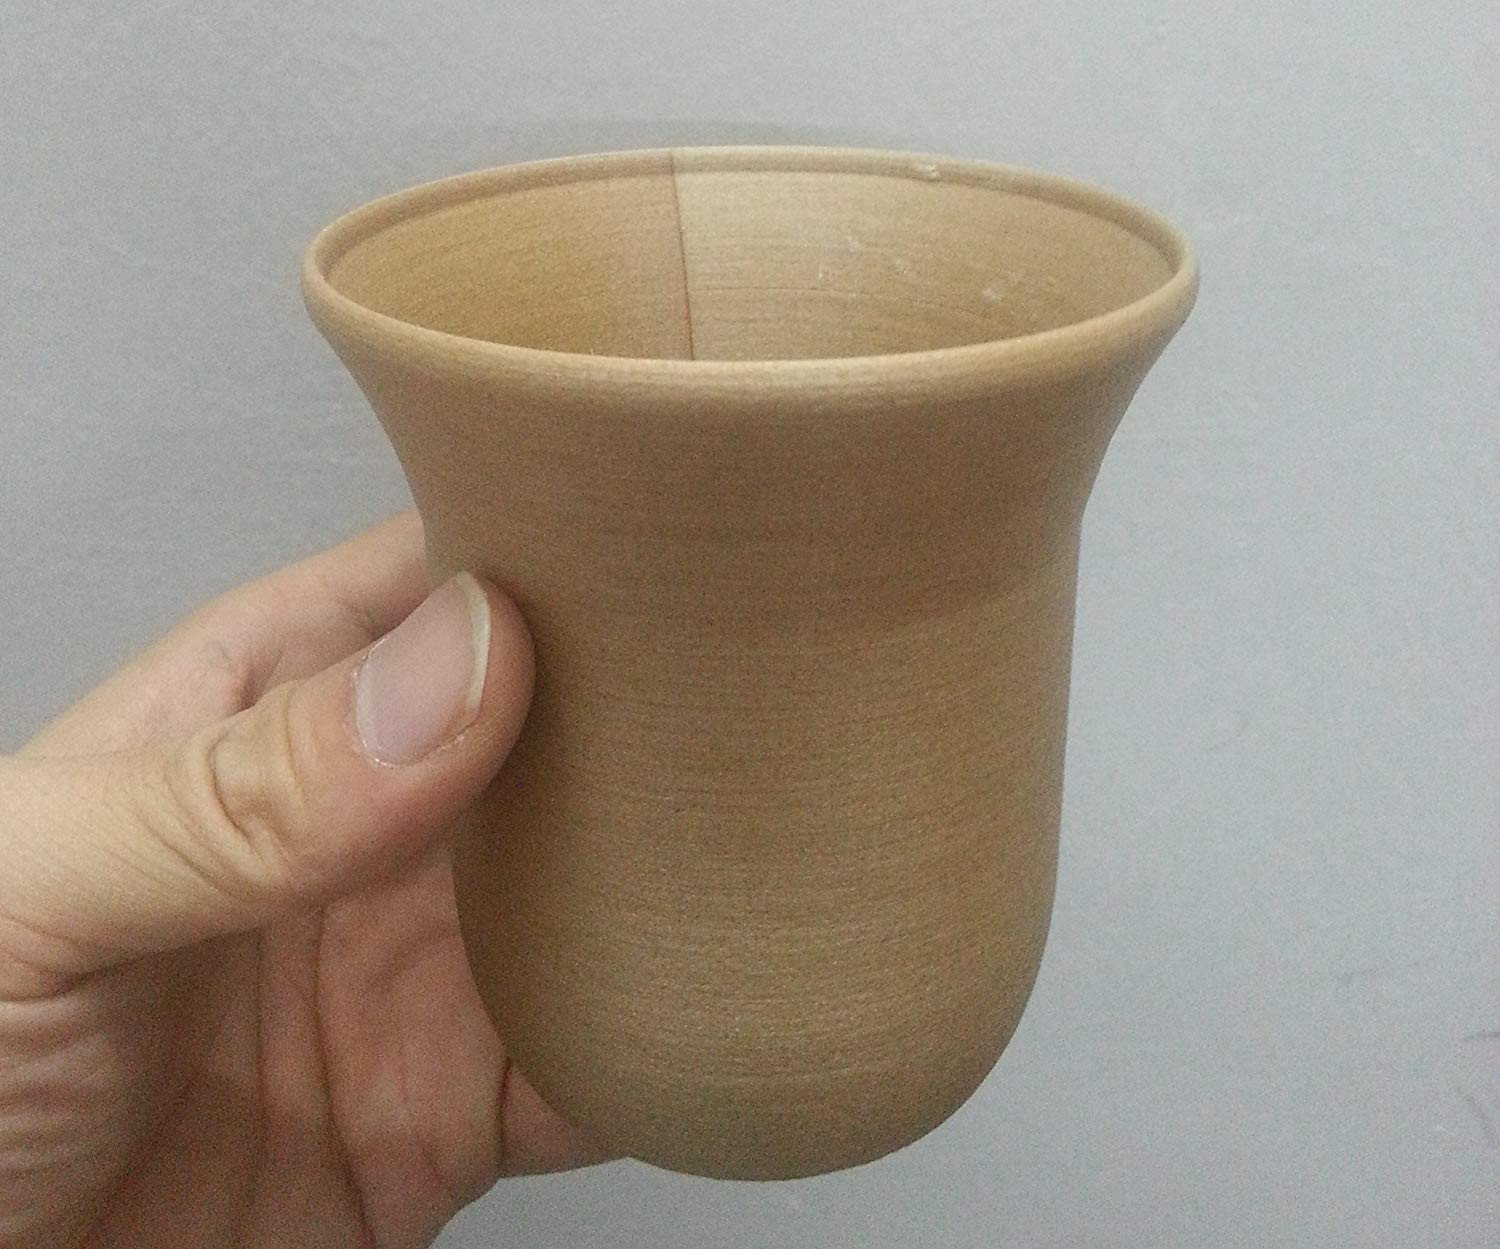 14 Famous 3d Printed Vase for Sale 2024 free download 3d printed vase for sale of amazon com rainbowme 3d printer filament pla 1 75mm wood 0 9kg pertaining to amazon com rainbowme 3d printer filament pla 1 75mm wood 0 9kgic2bcc2882lbsic2bcc289 